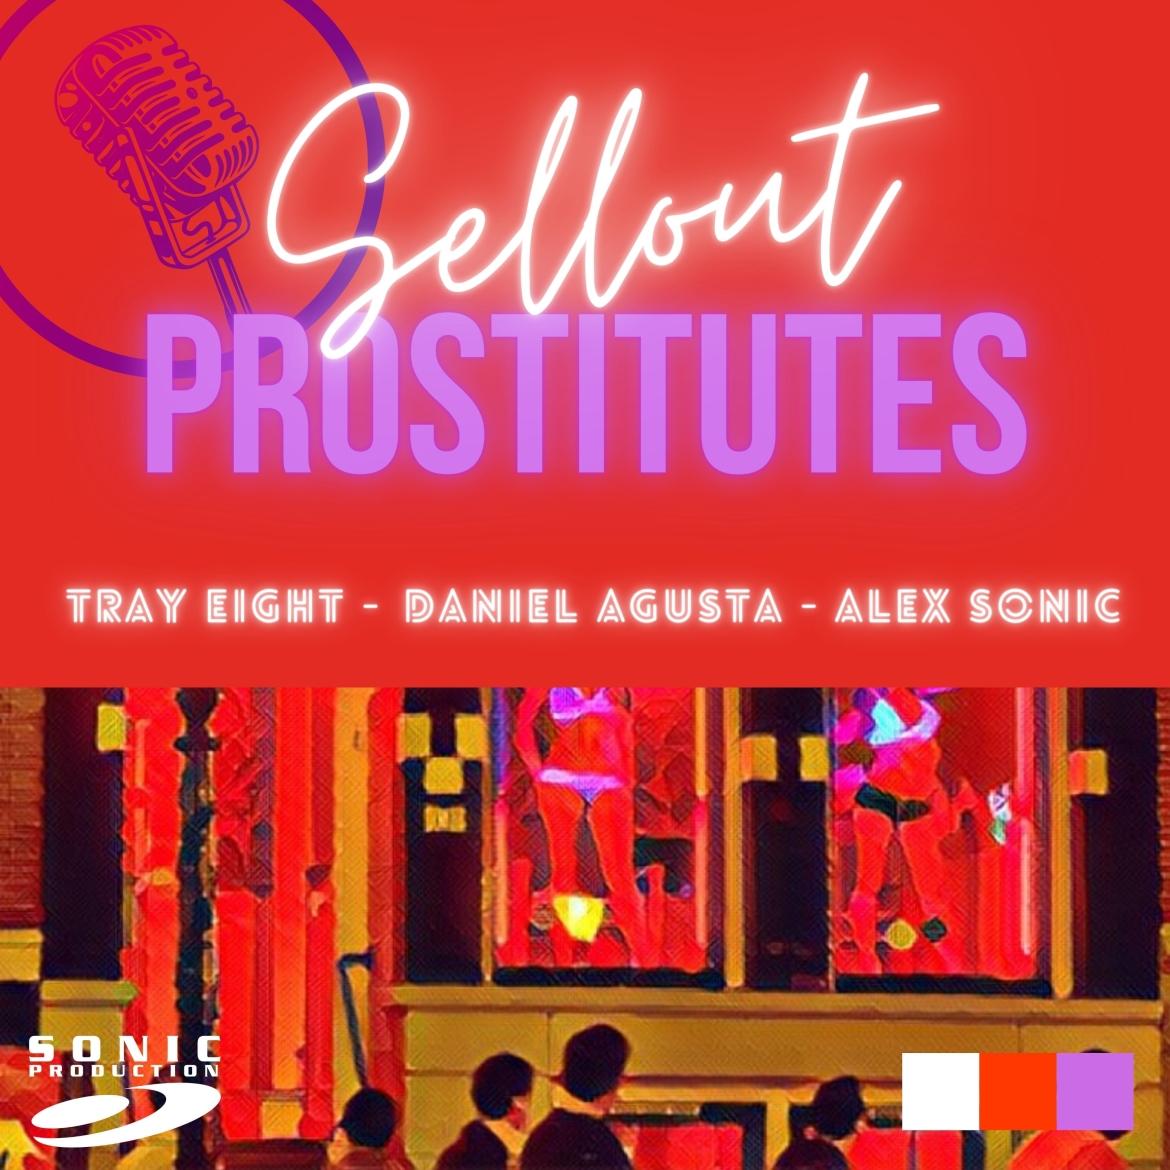 Sellout Prostitutes